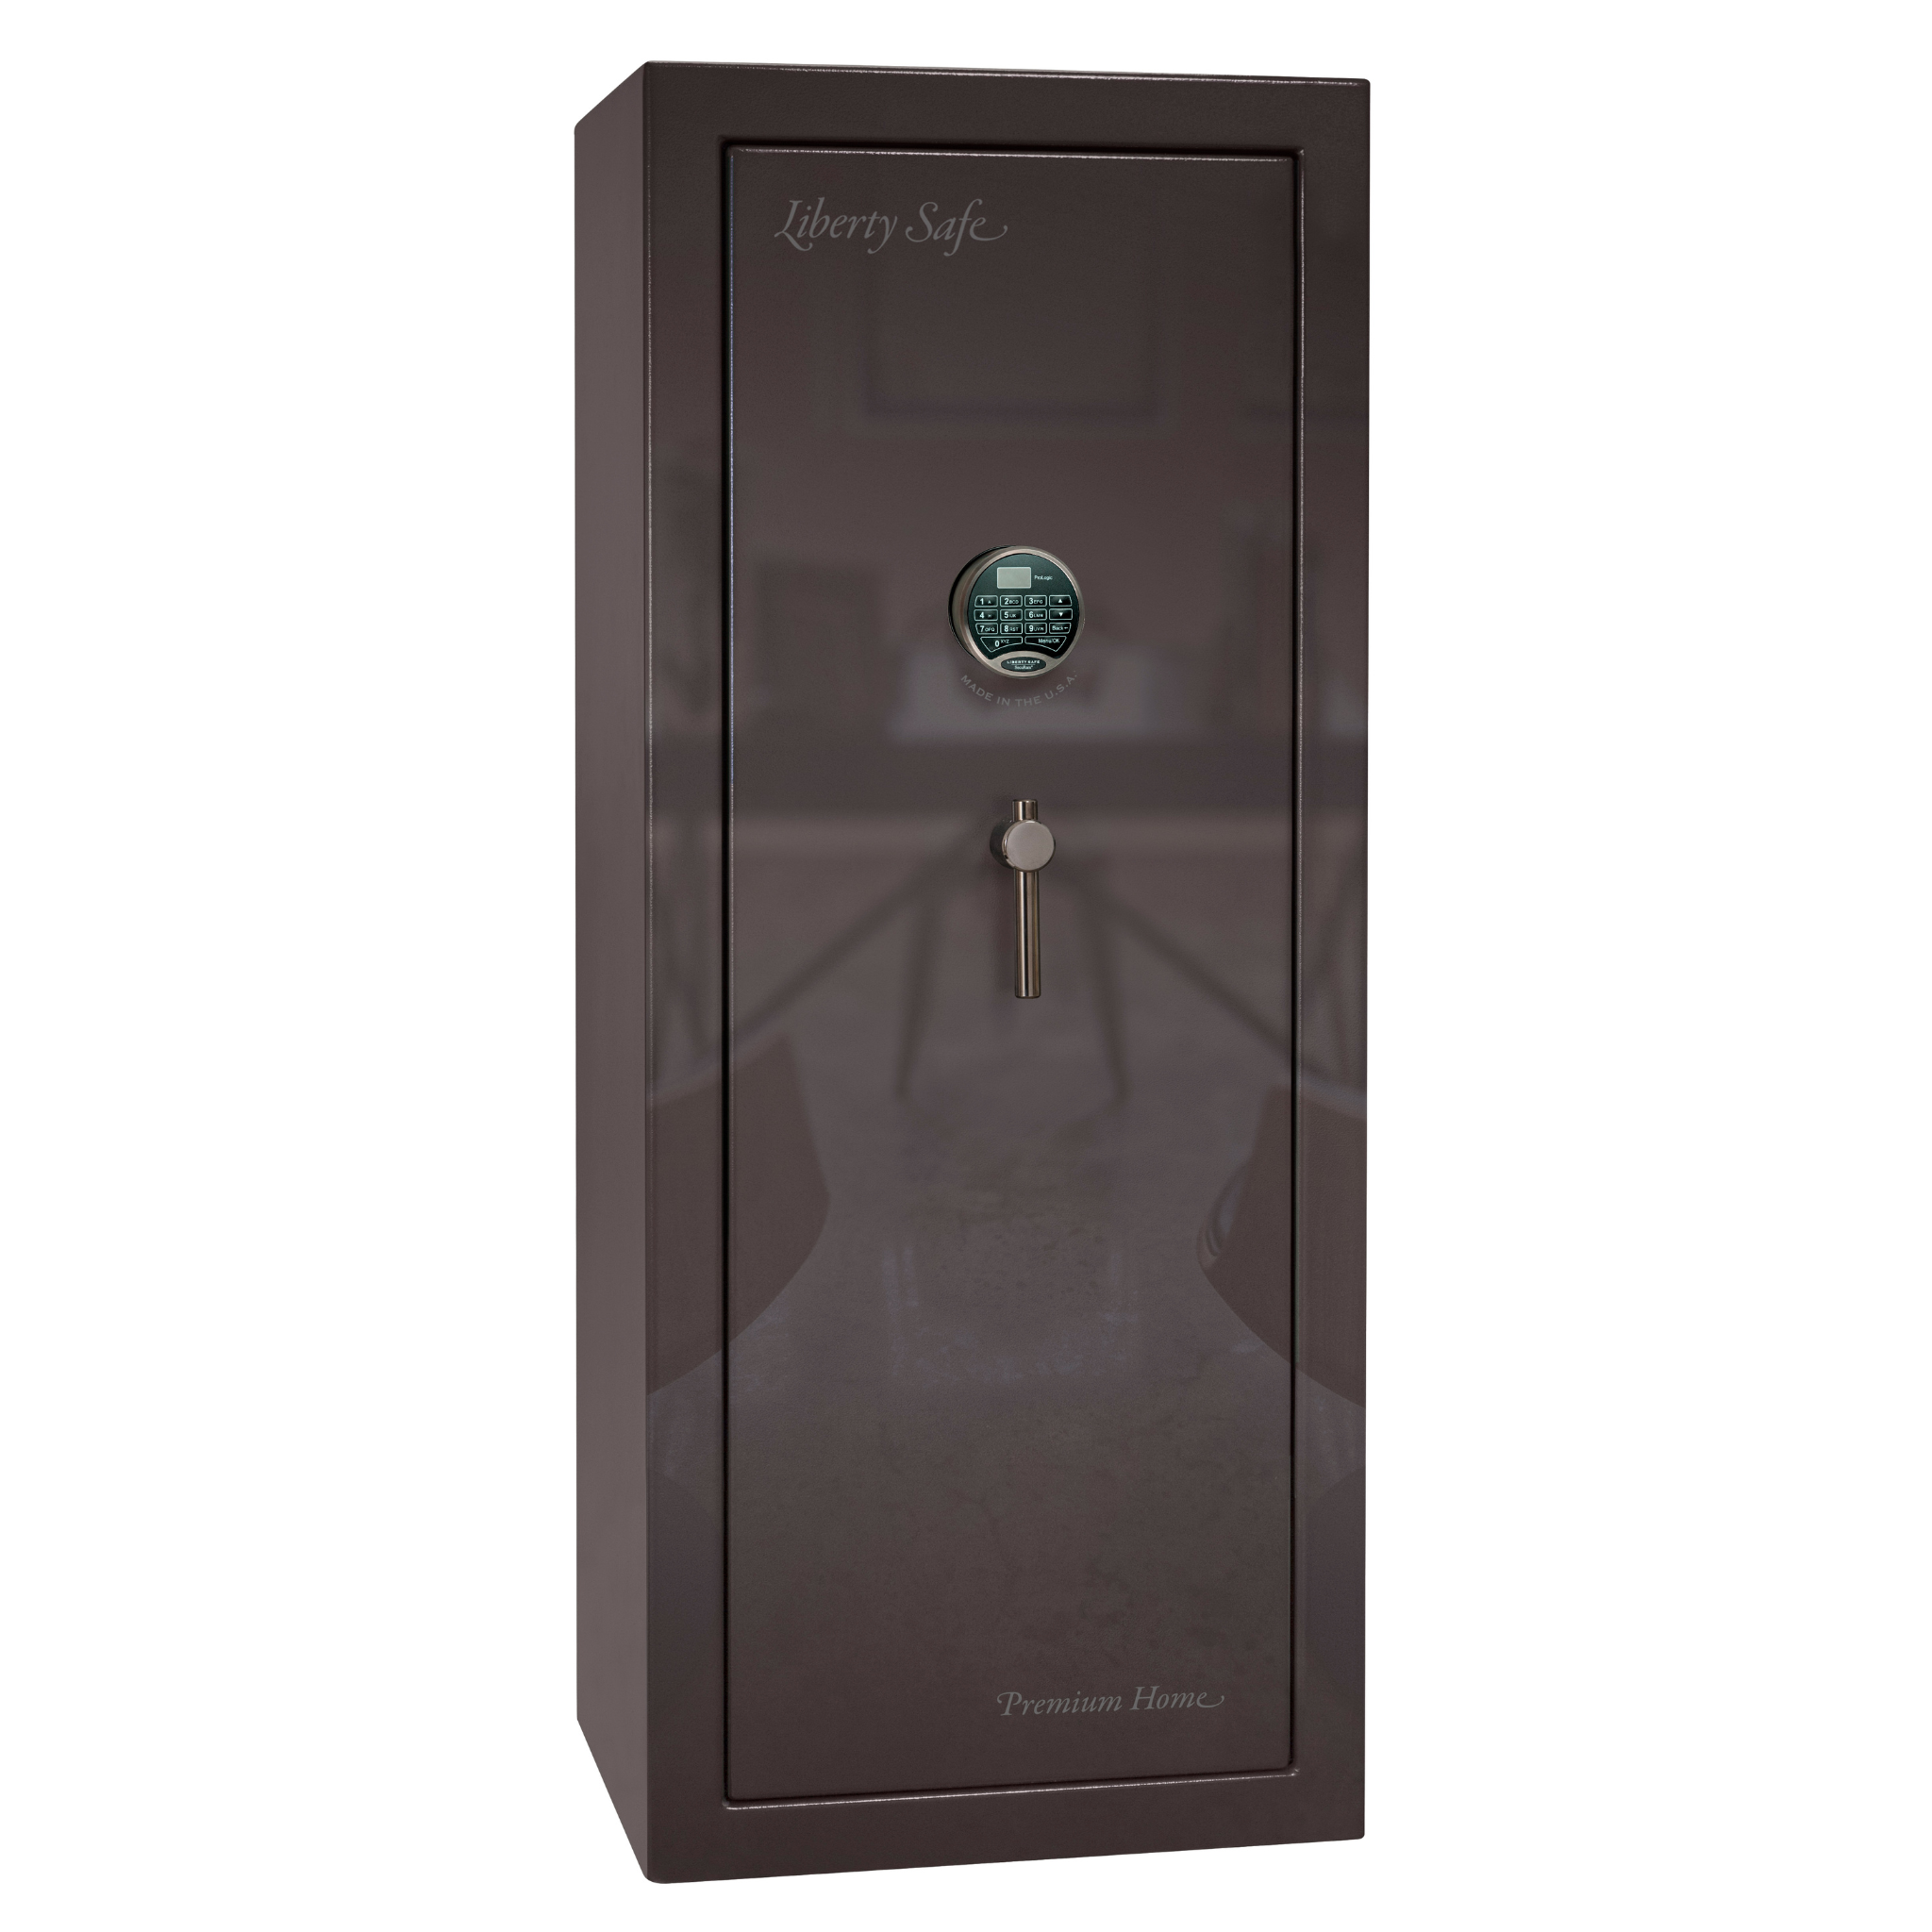 Premium Home Series | Level 7 Security | 2 Hour Fire Protection | 17 | Dimensions: 60.25"(H) x 24.5"(W) x 19"(D) | Black Cherry Gloss - Closed Door